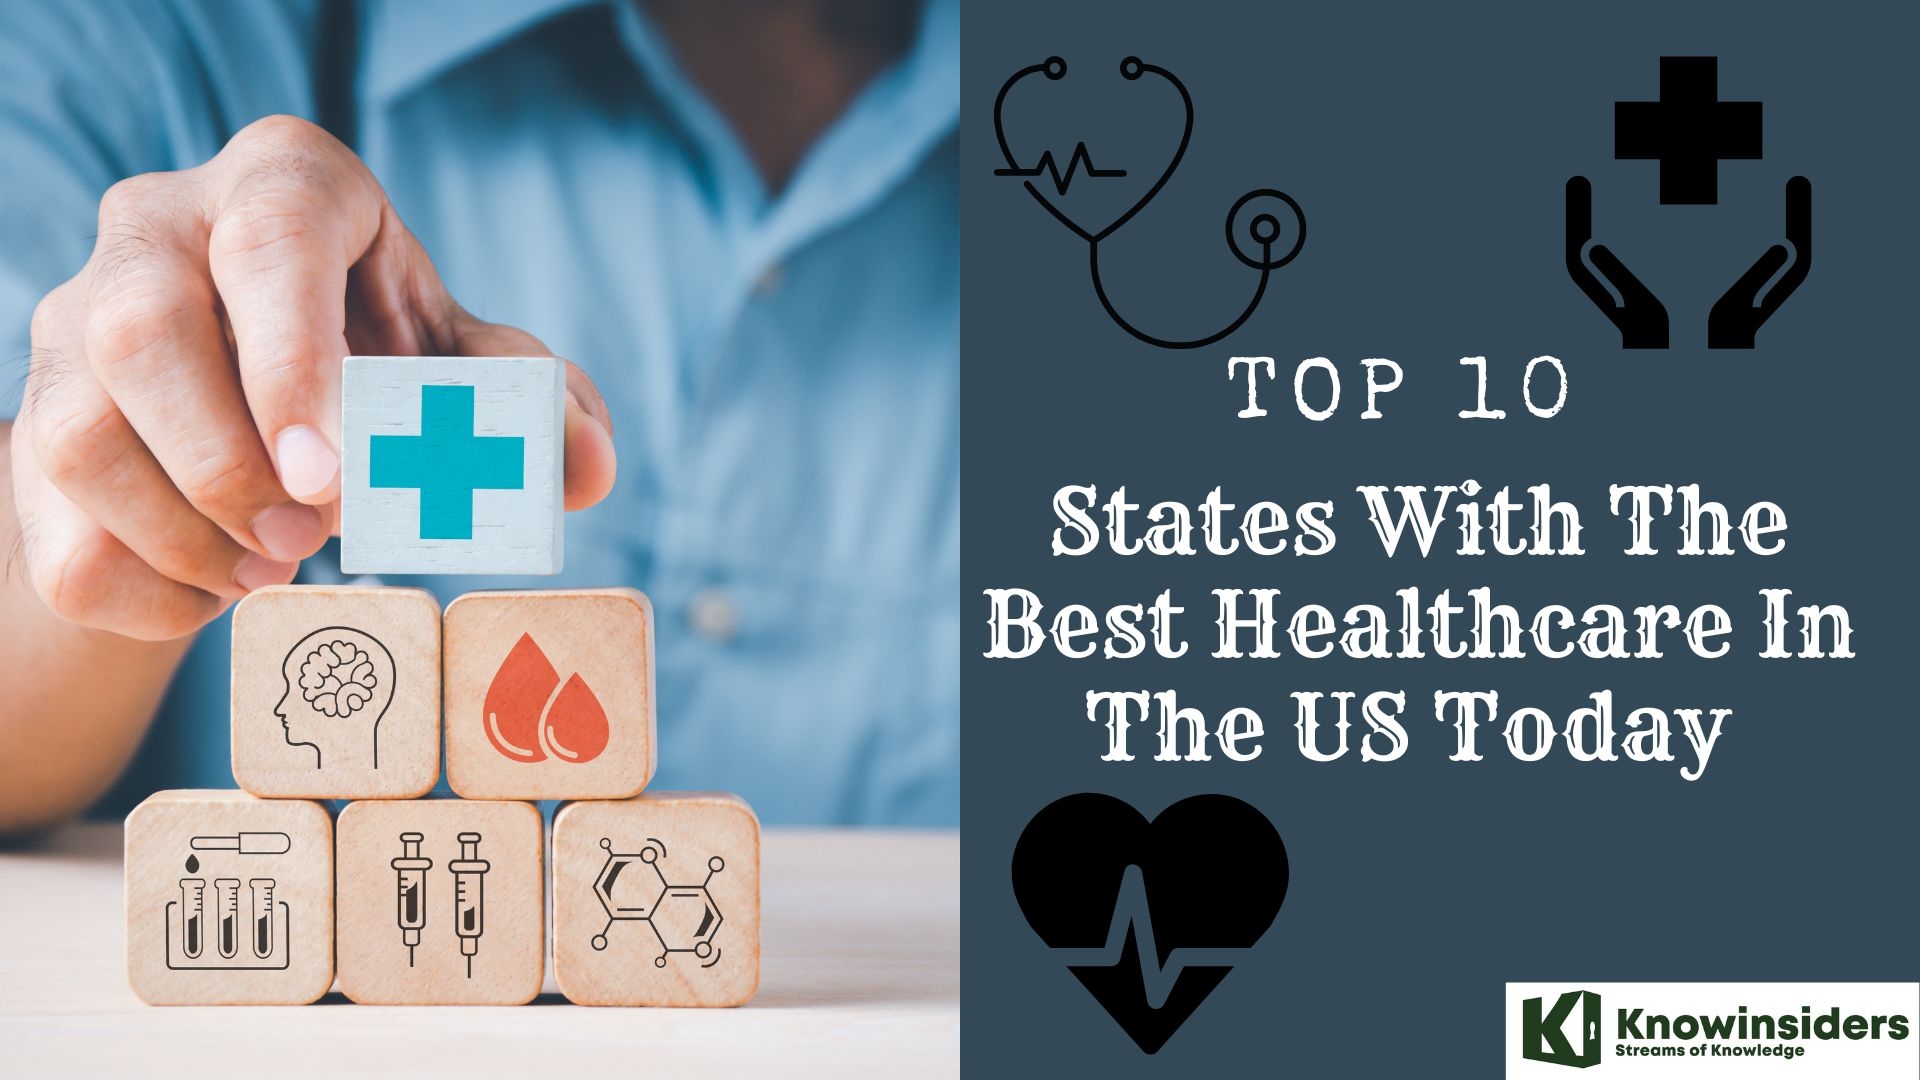 Top 10 States With The Best Healthcare In The US Today  Knowinsiders.com